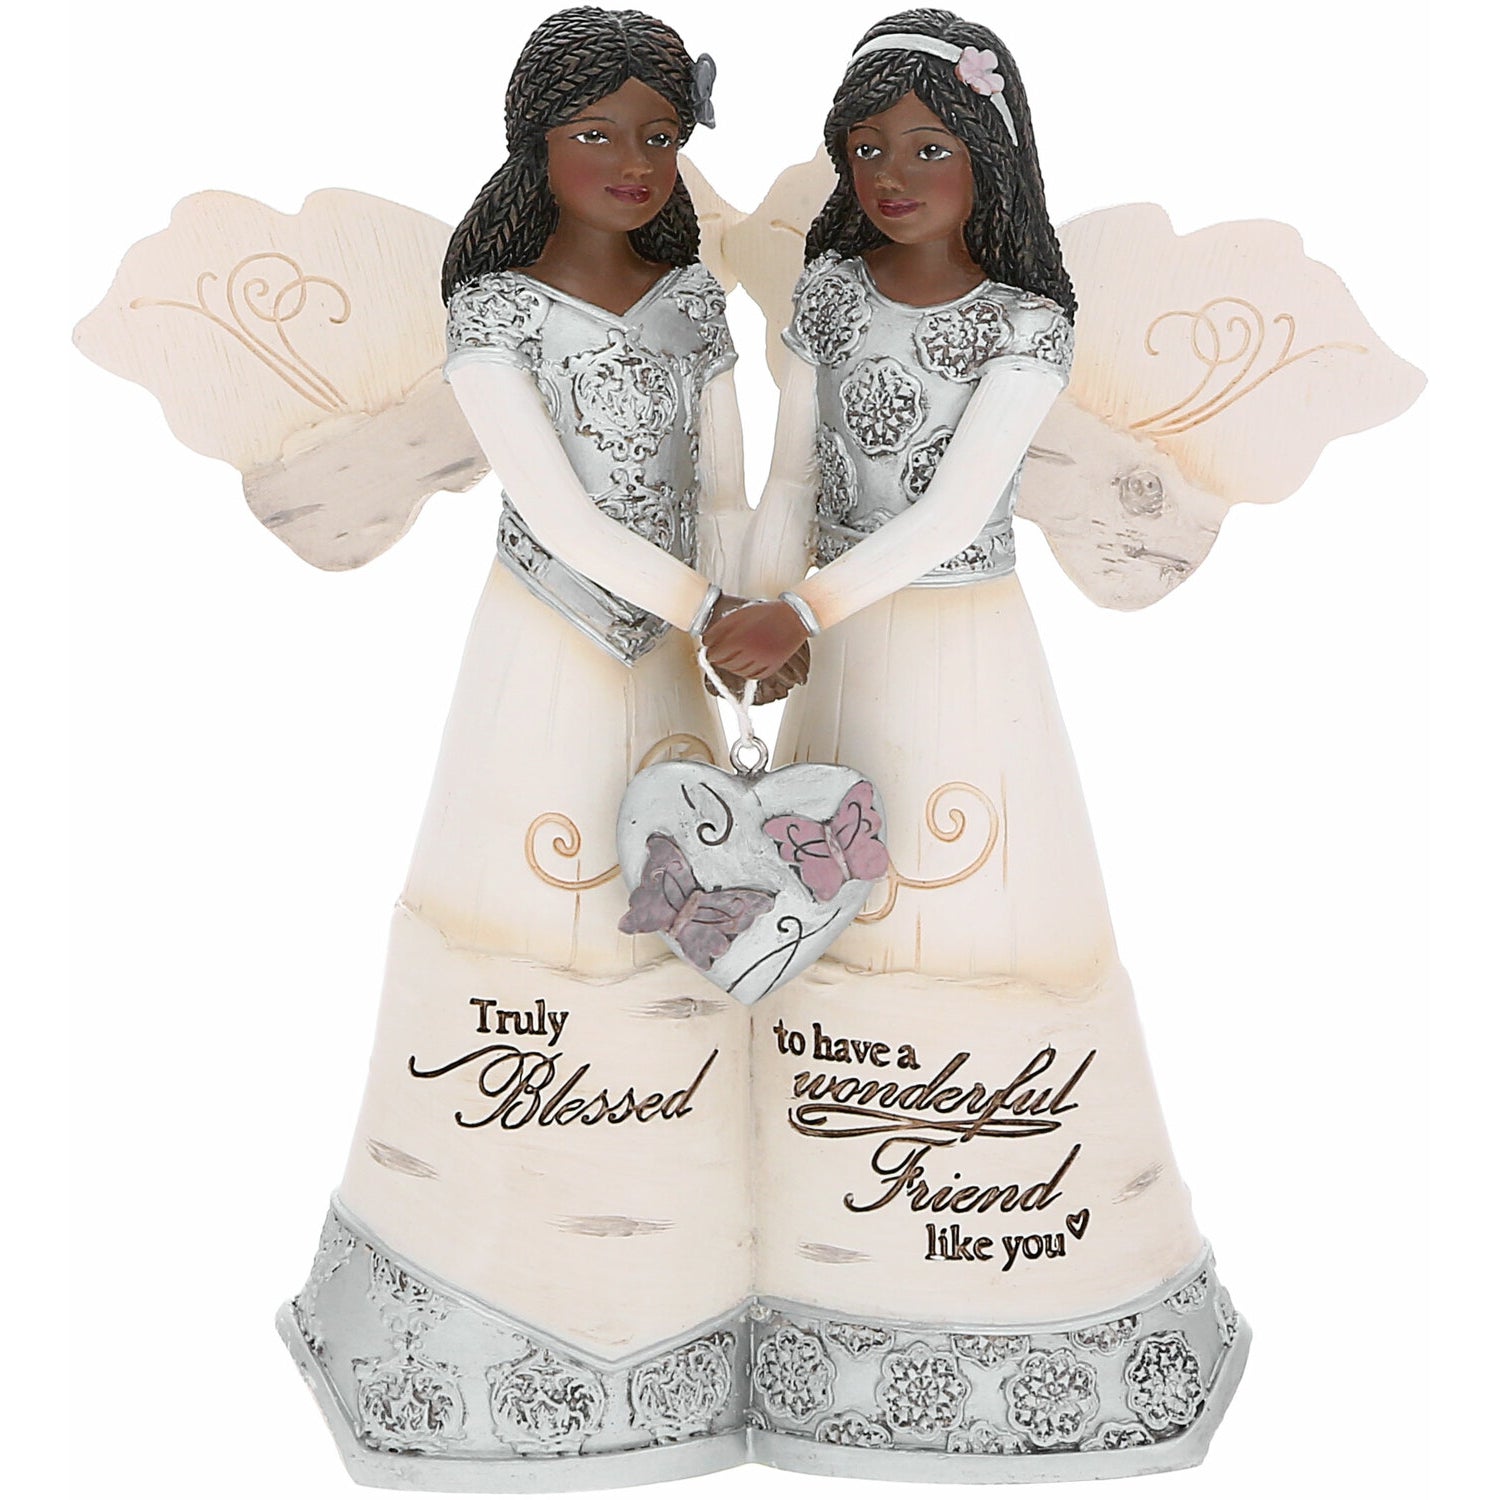 Amazon.com: Celebrating Friendship Gifts, Memorial Friendship Sister Friend  Sculpture Decoration We'll Be Friends Angels Figurines Forever My Friend  Sympathy Gifts for Women Girls (B, One Size) : Home & Kitchen